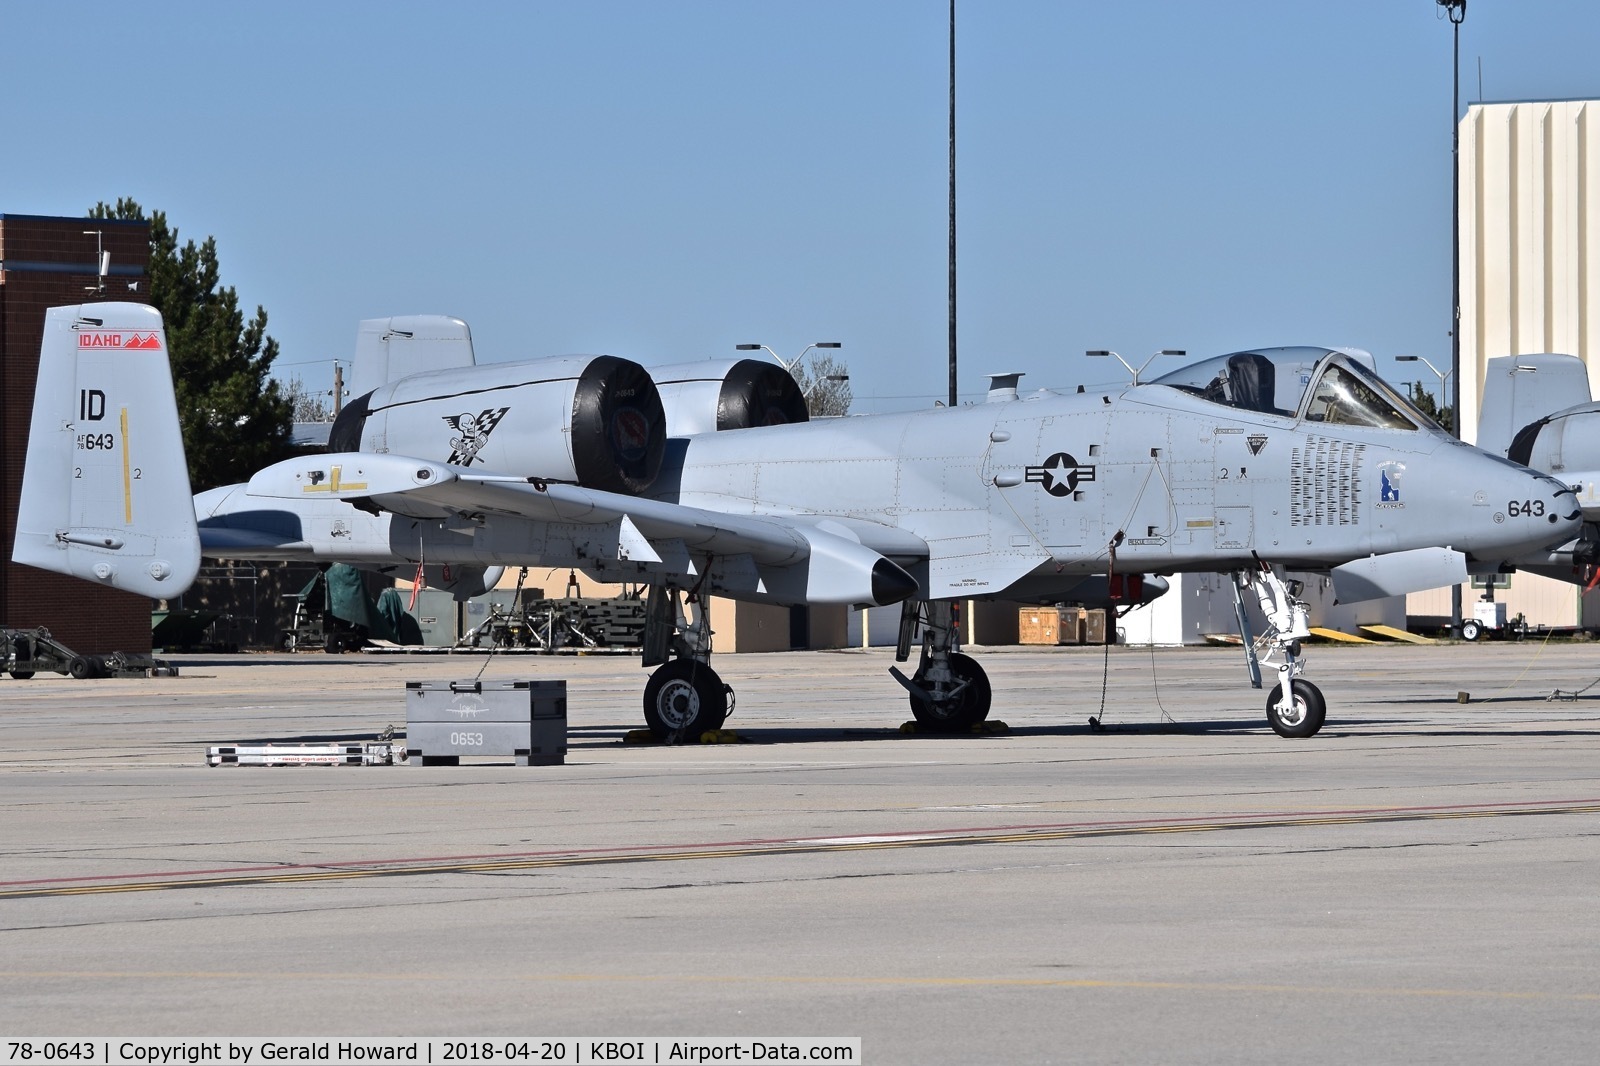 78-0643, 1978 Fairchild Republic A-10C Thunderbolt II C/N A10-0263, Parked on the Idaho ANG ramp. 190th Fighter Sq., 124th Fighter Wing.